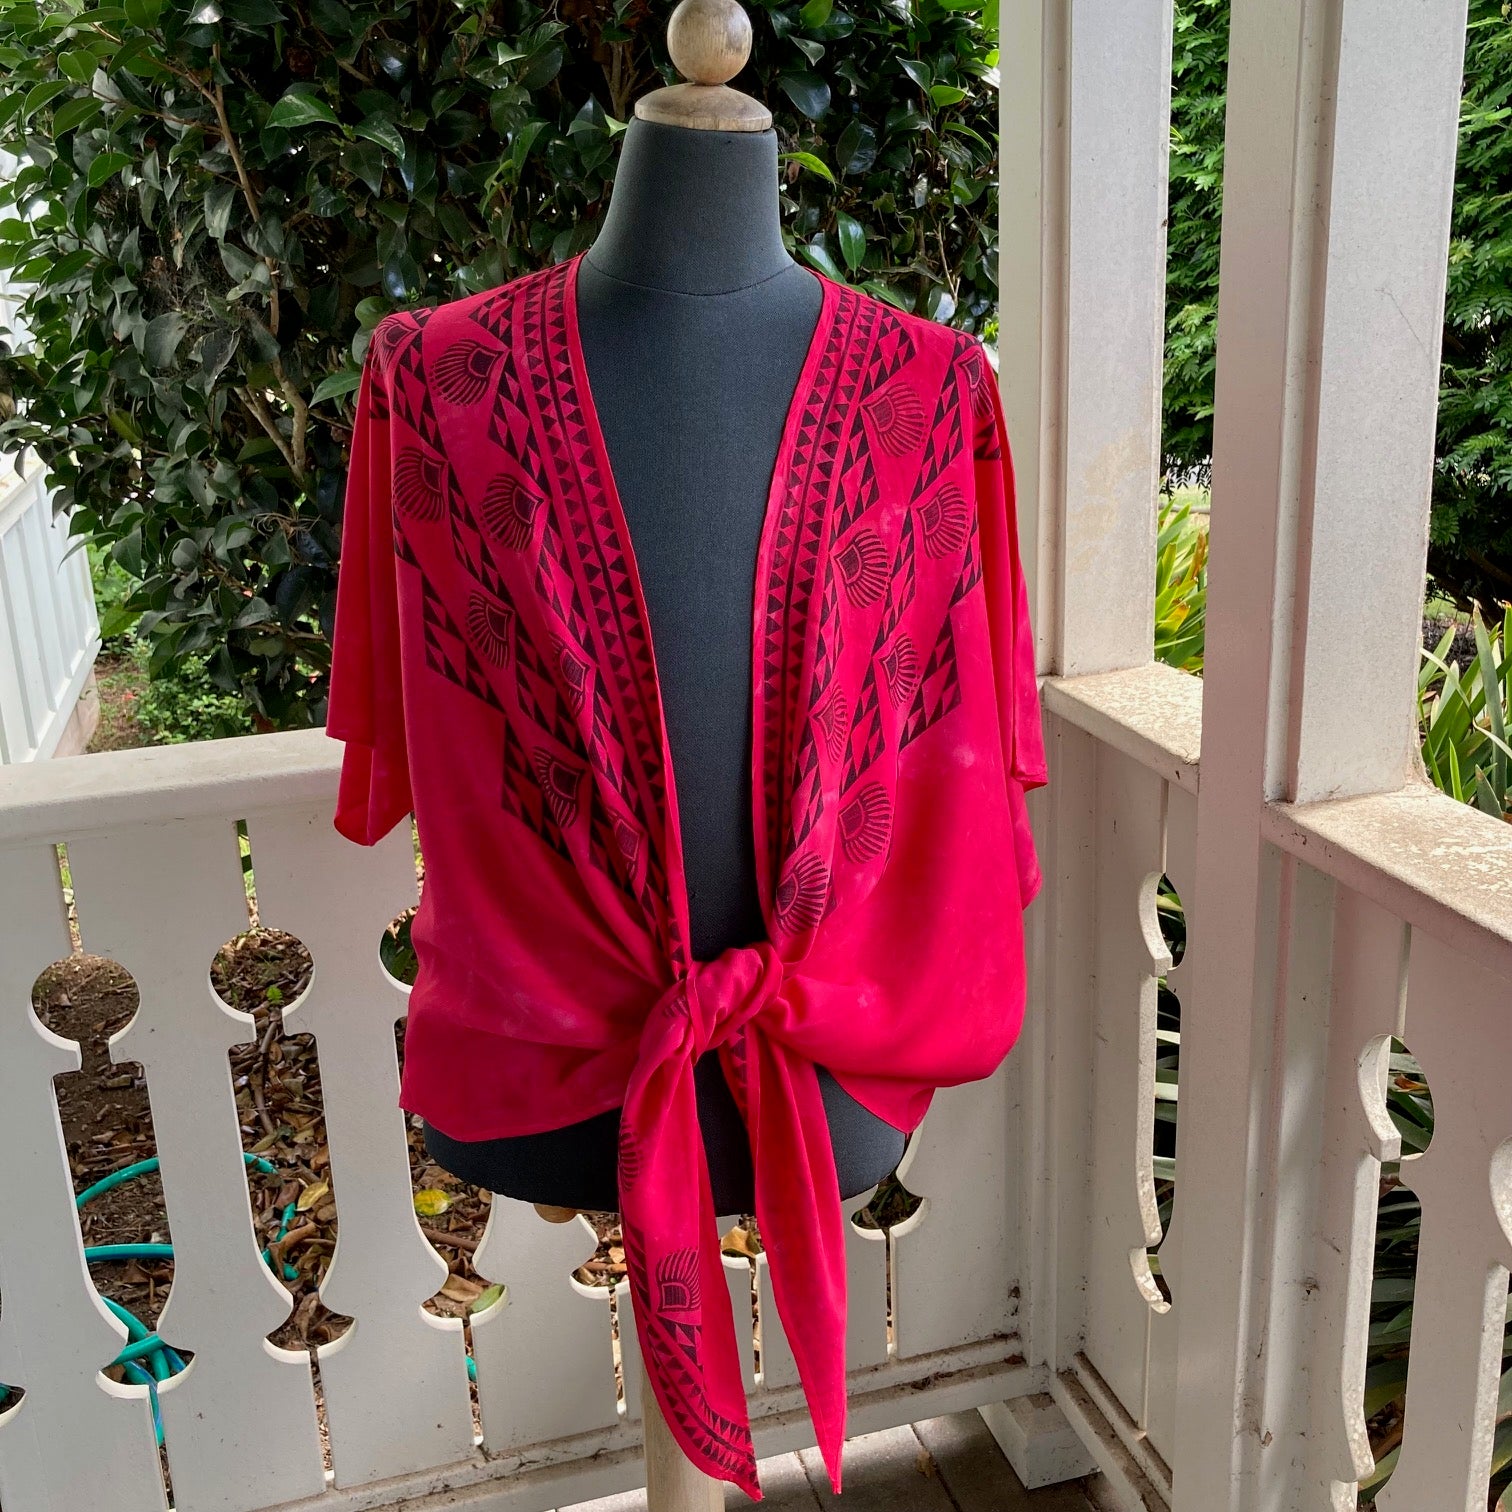 Ohe Kapala TIE Blouse in Red with Mauna and Lehua